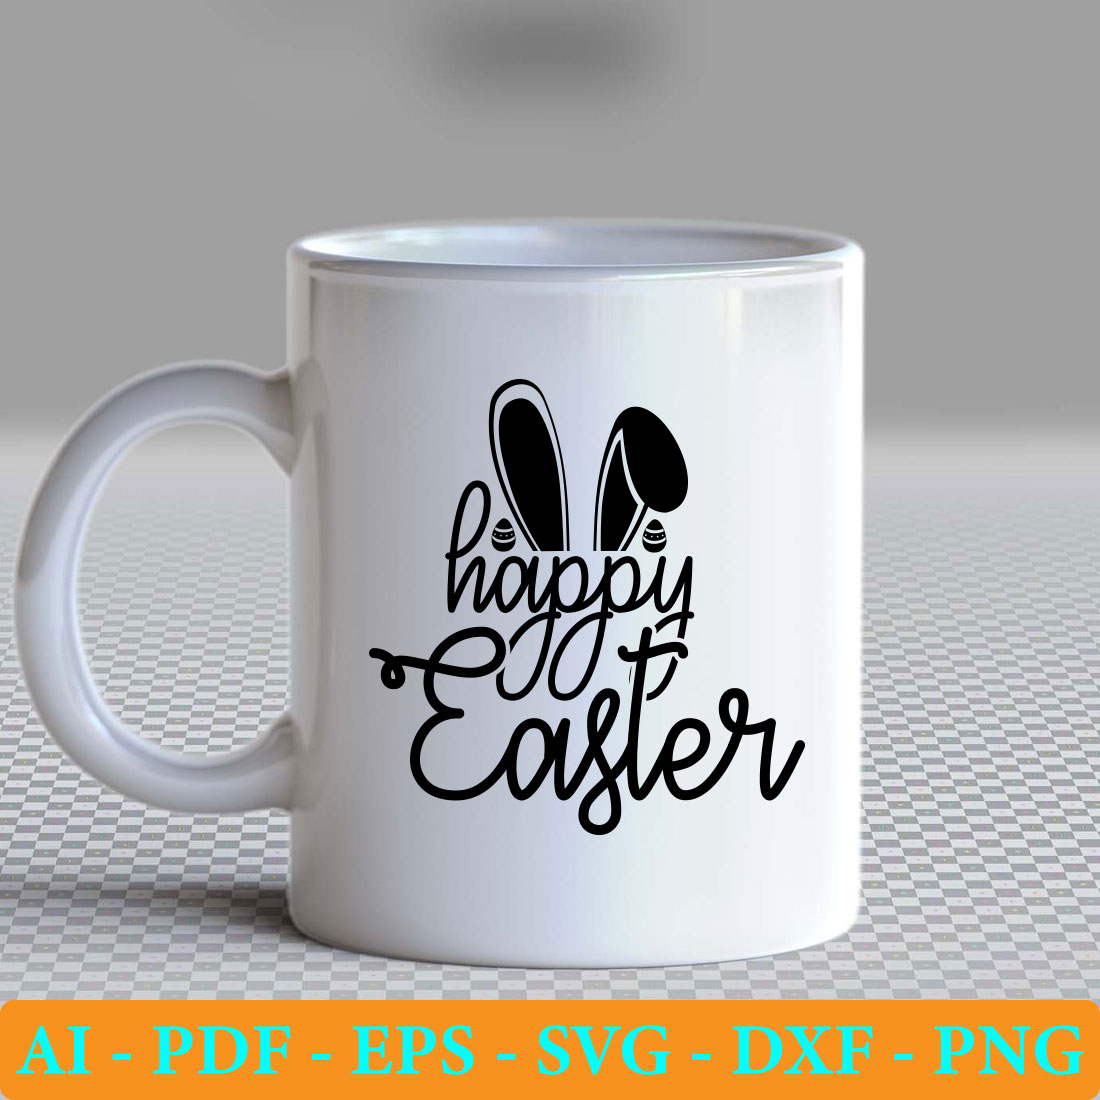 White coffee mug with the words happy easter on it.